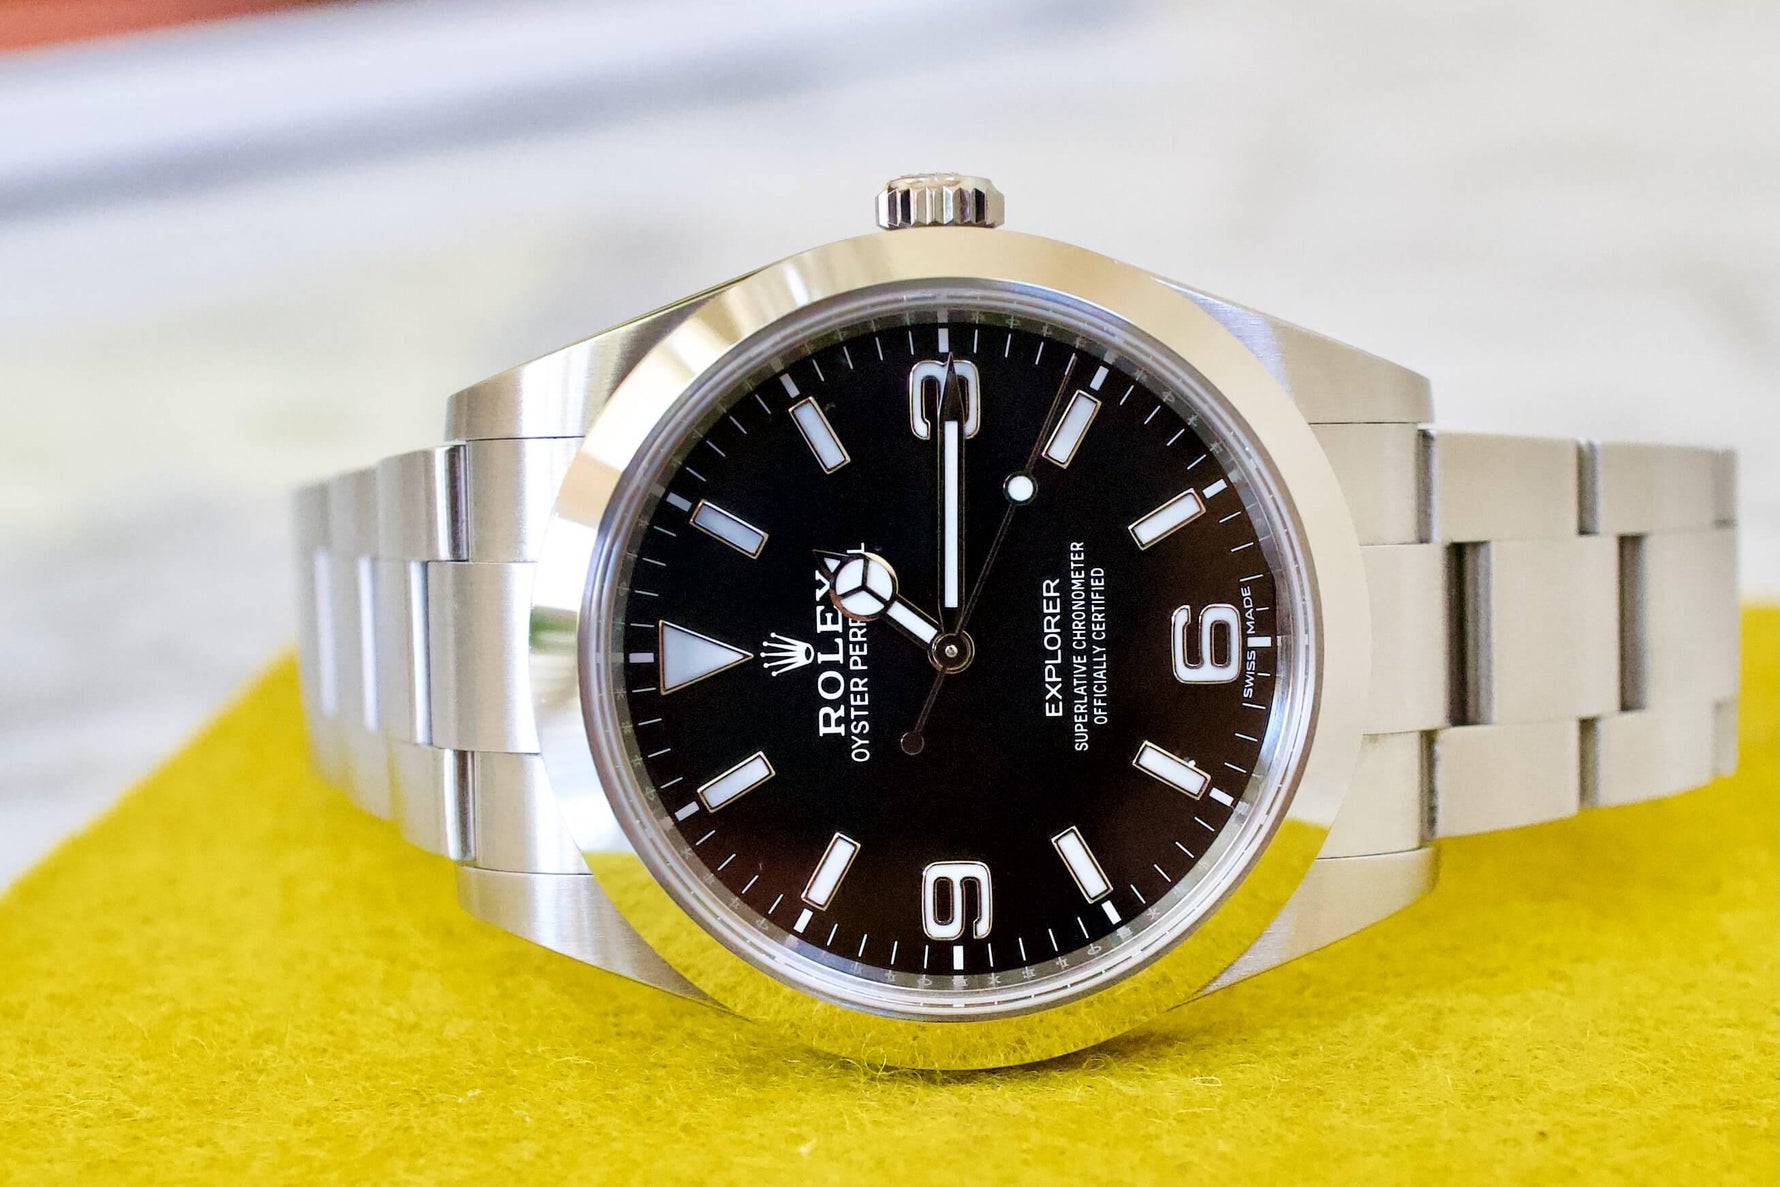 SOLD OUT: Rolex Explorer 39mm 214270 Mark II Mark 2 Dial 2020 box and Papers Rolex Warranty - WearingTime Luxury Watches